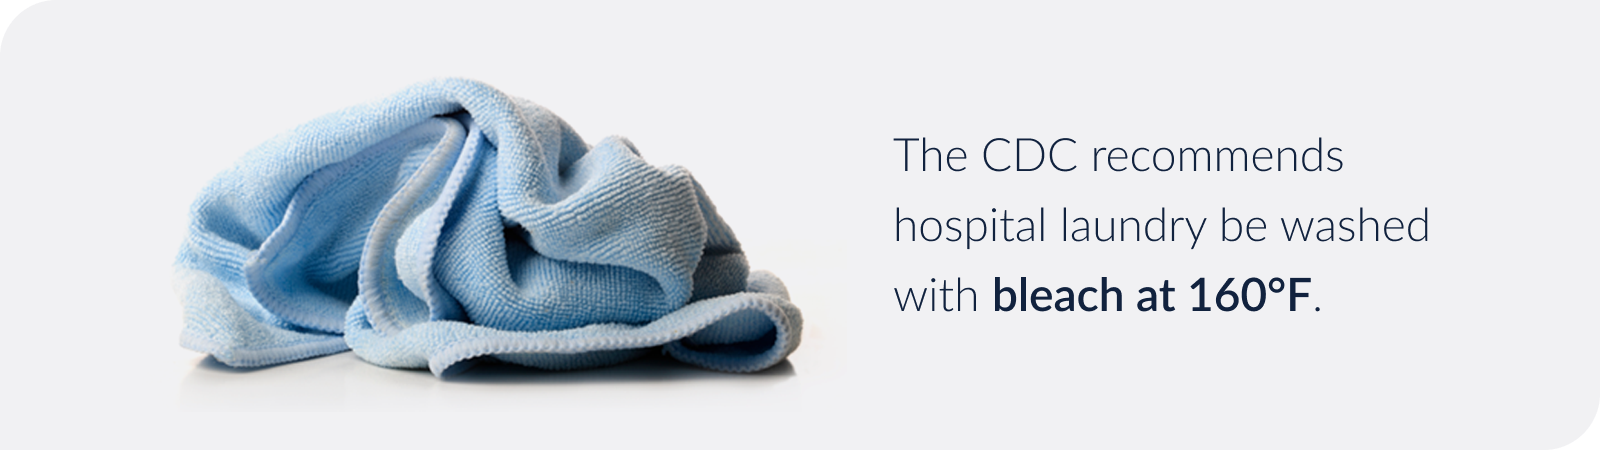 The CDC recommends hospital laundry be washed with bleach at 160 degrees F